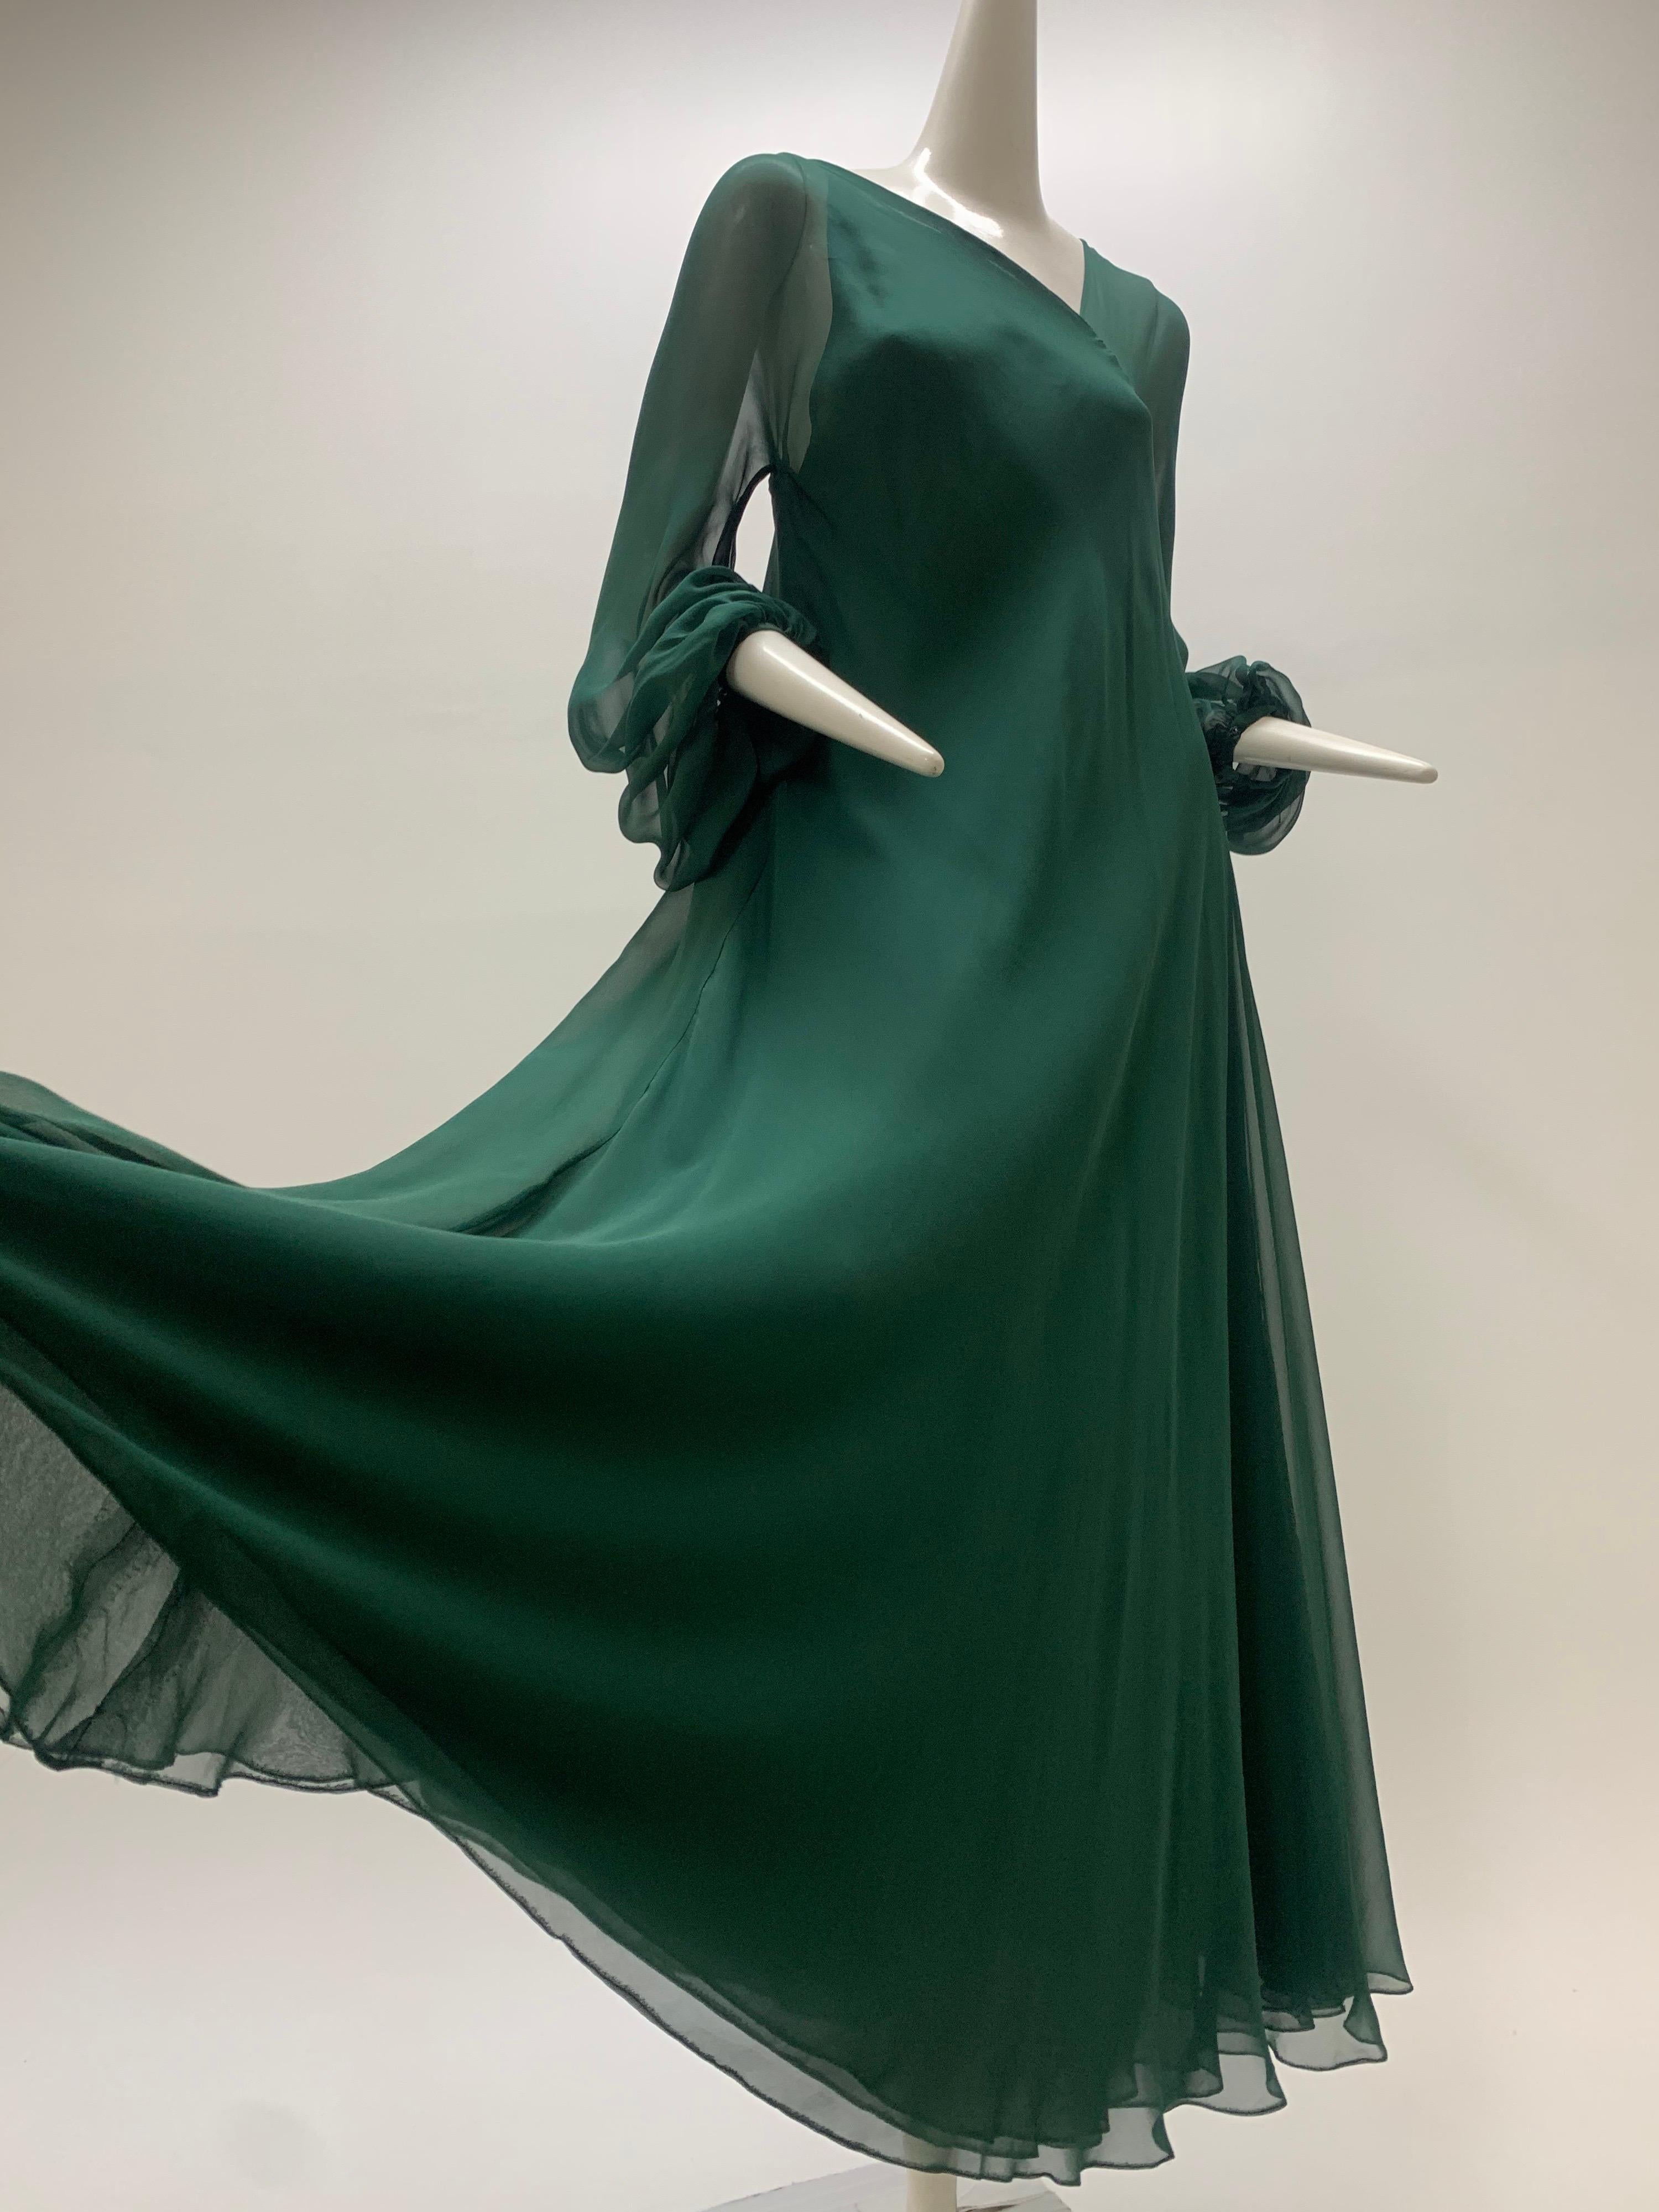 1970s Halston Forest Green Silk Chiffon Asymmetrical Maxi. One shoulder is sheer chiffon and the other shoulder is constructed of layered bias cut chiffon. Balloon sleeves. Slips over the head, no closure. An early example of an iconic designer's